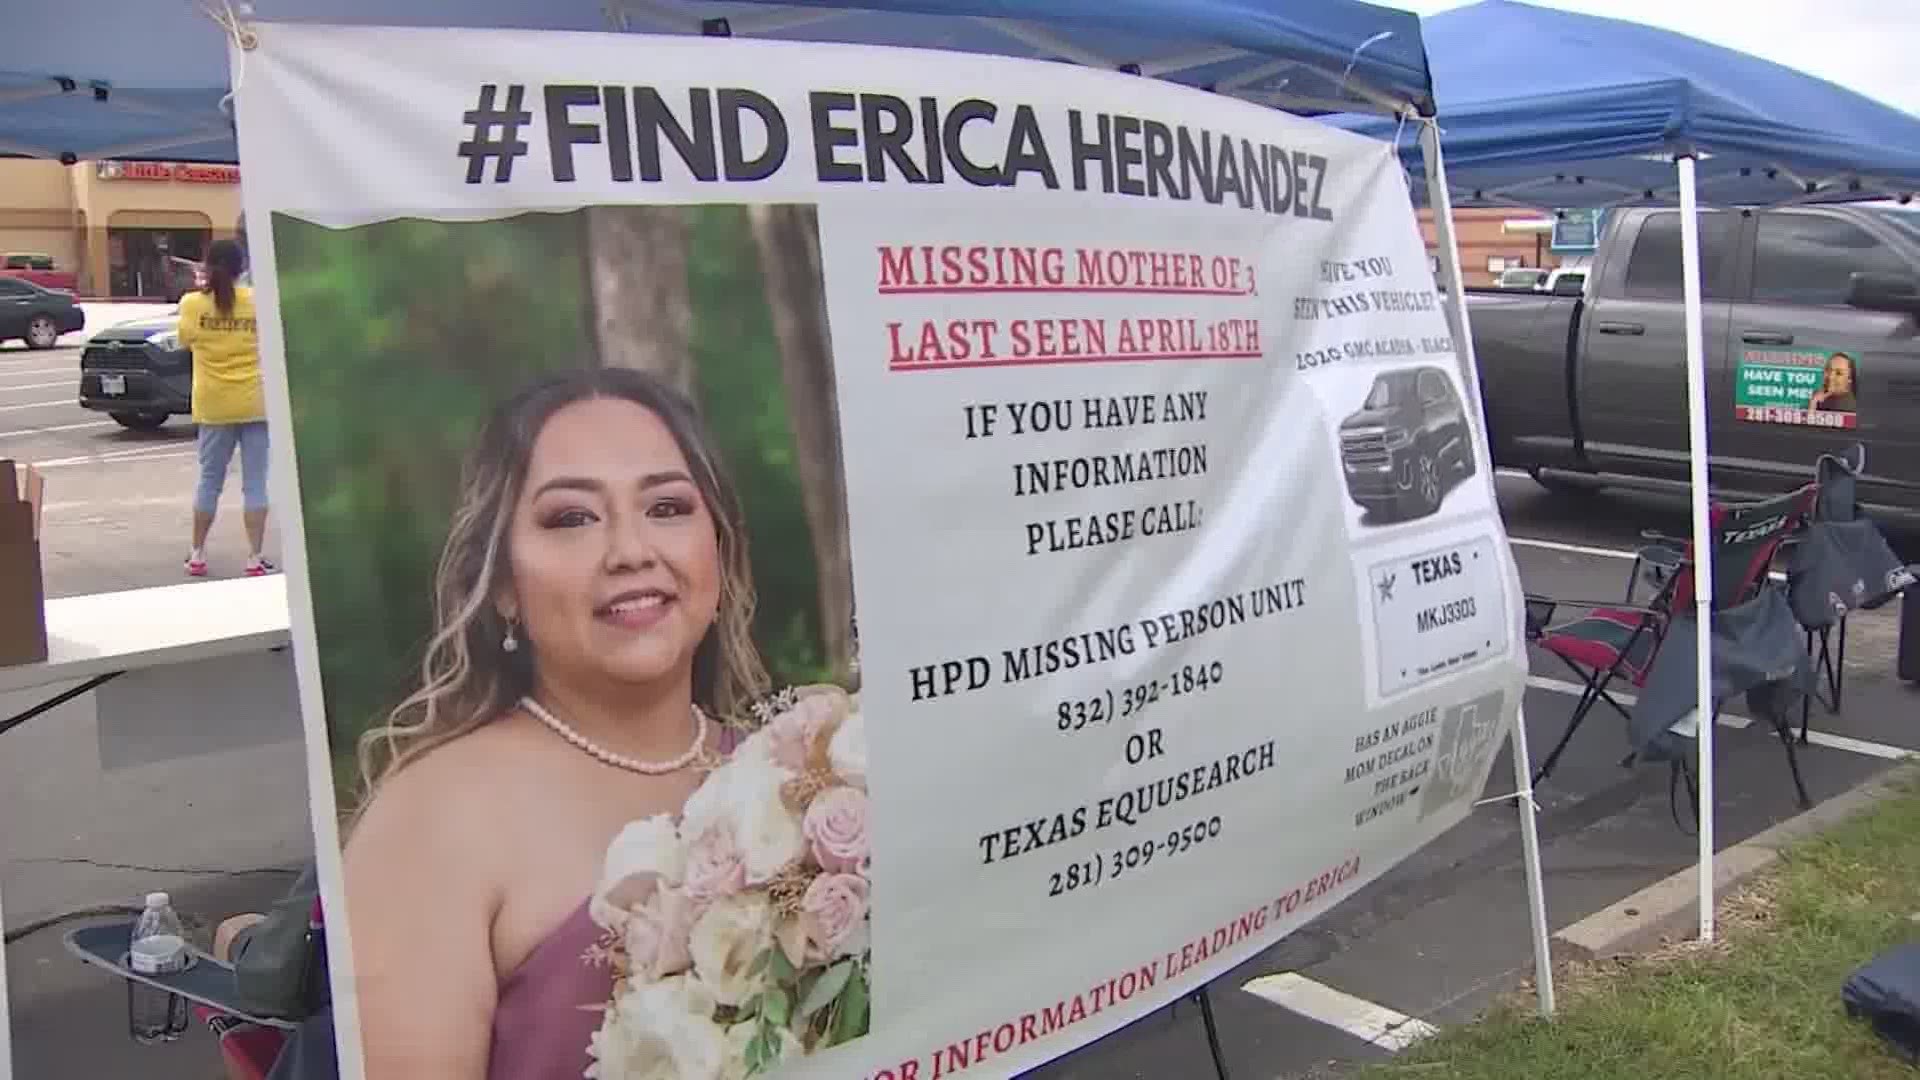 Police found her SUV yesterday, and today, the remains were identified as those of the missing mother.